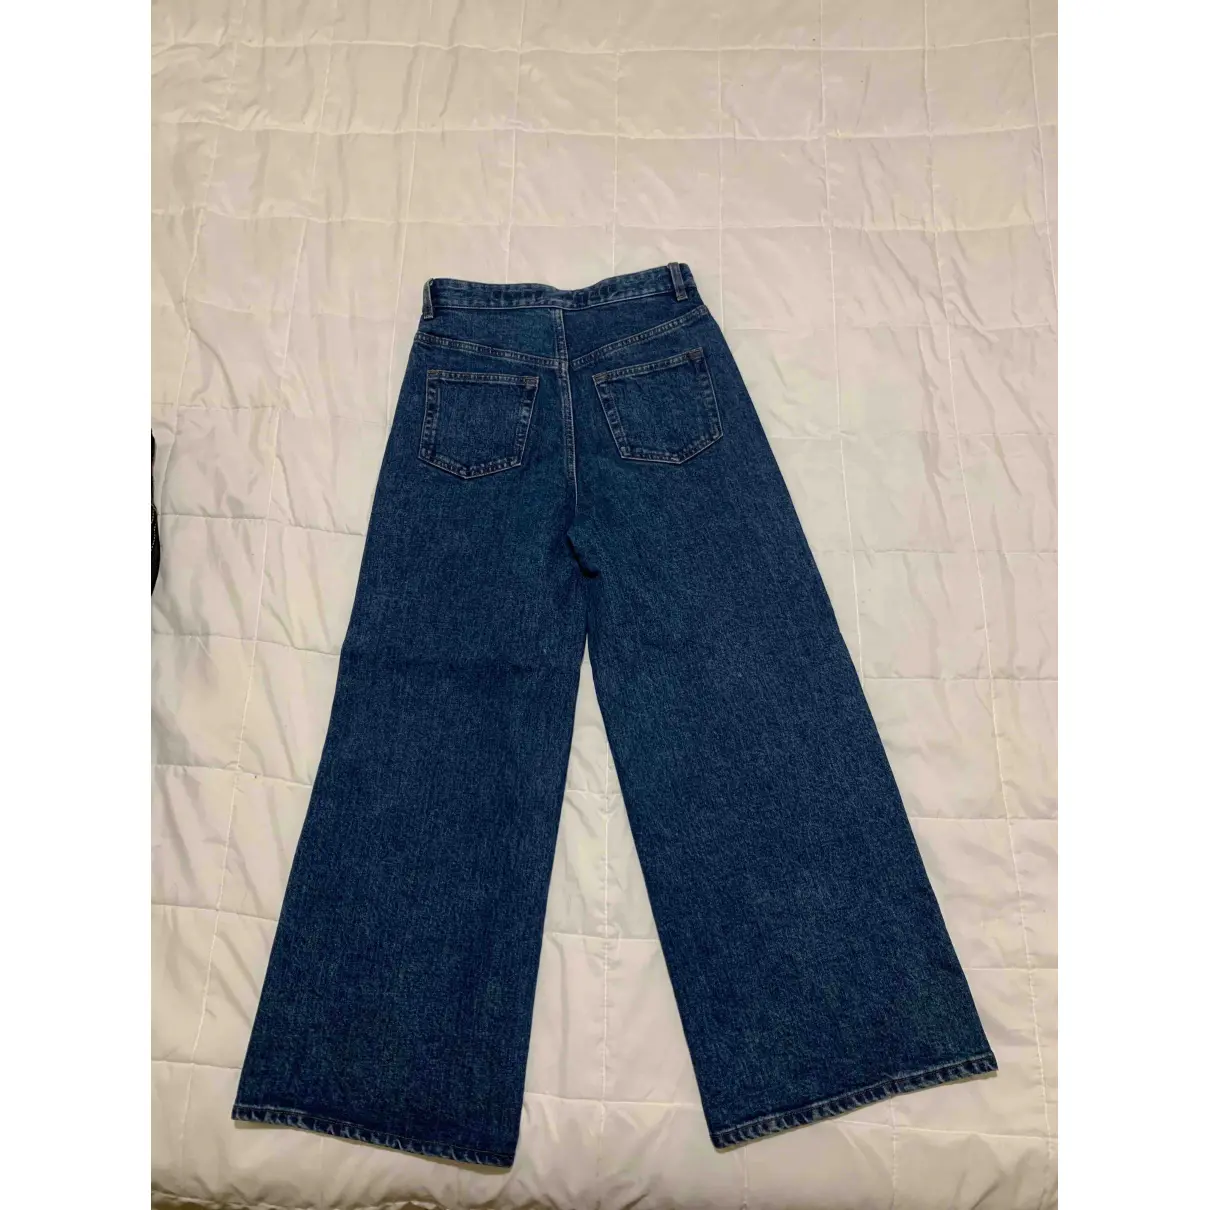 Buy & Other Stories Large jeans online